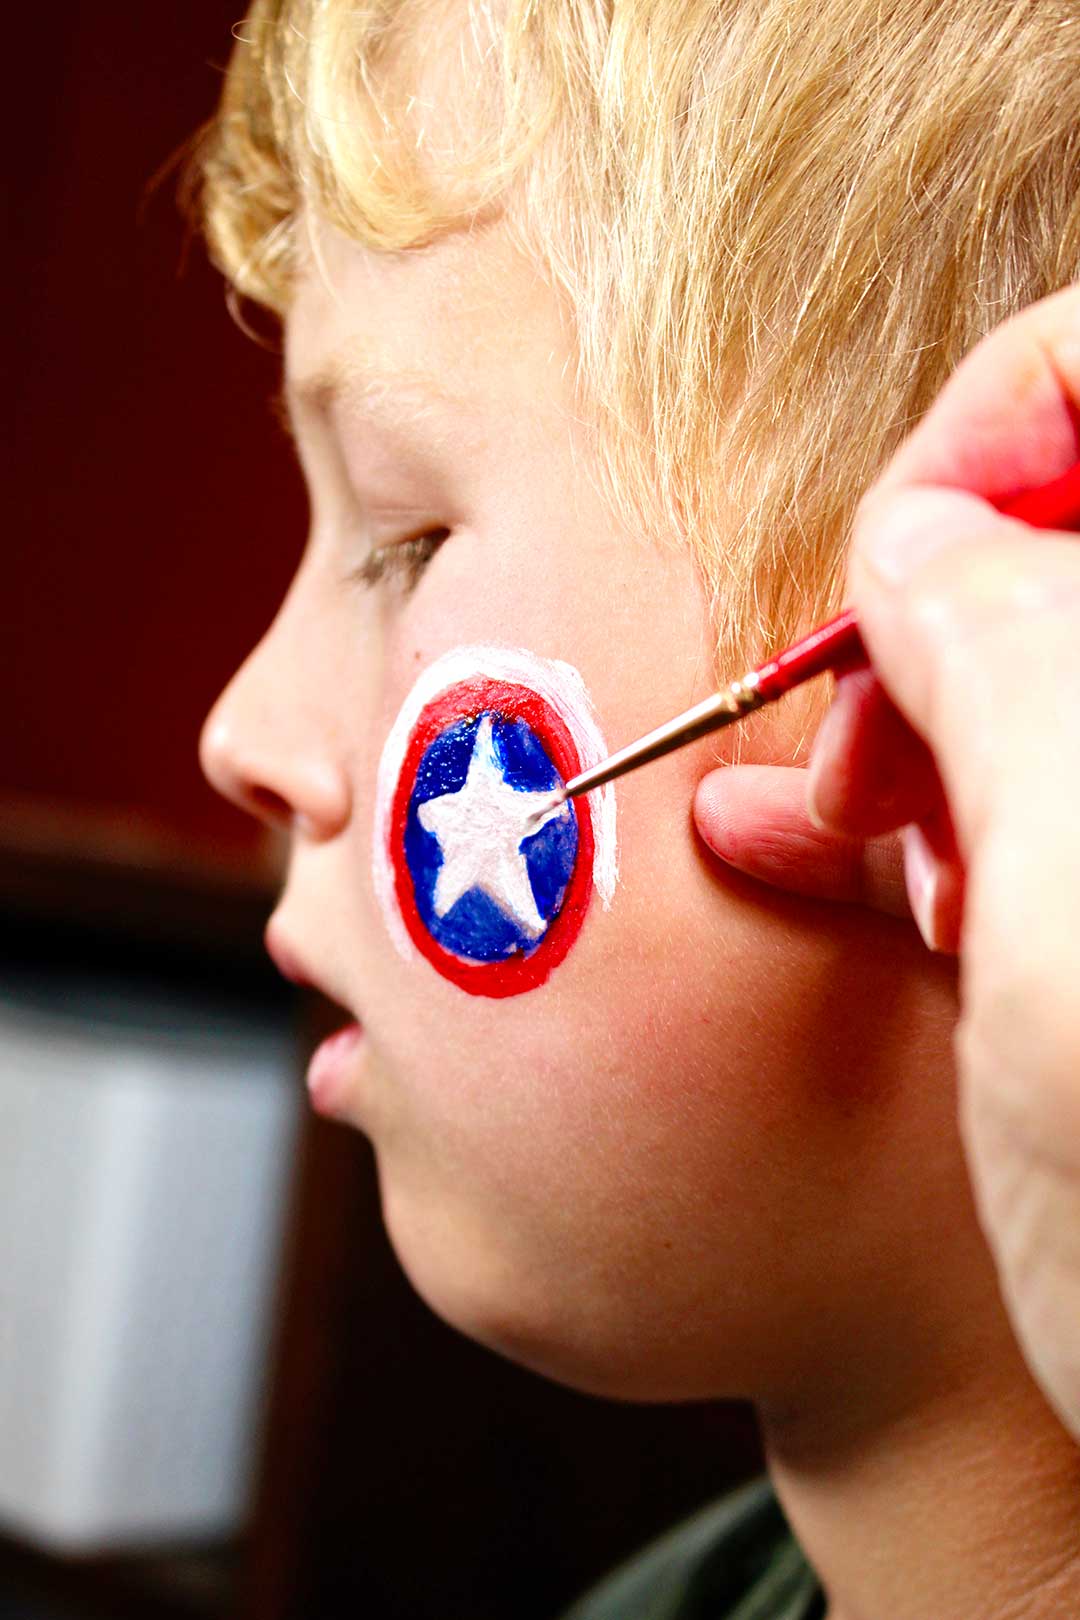 Profile of boy with hand painting details of Captain America shield on cheek.